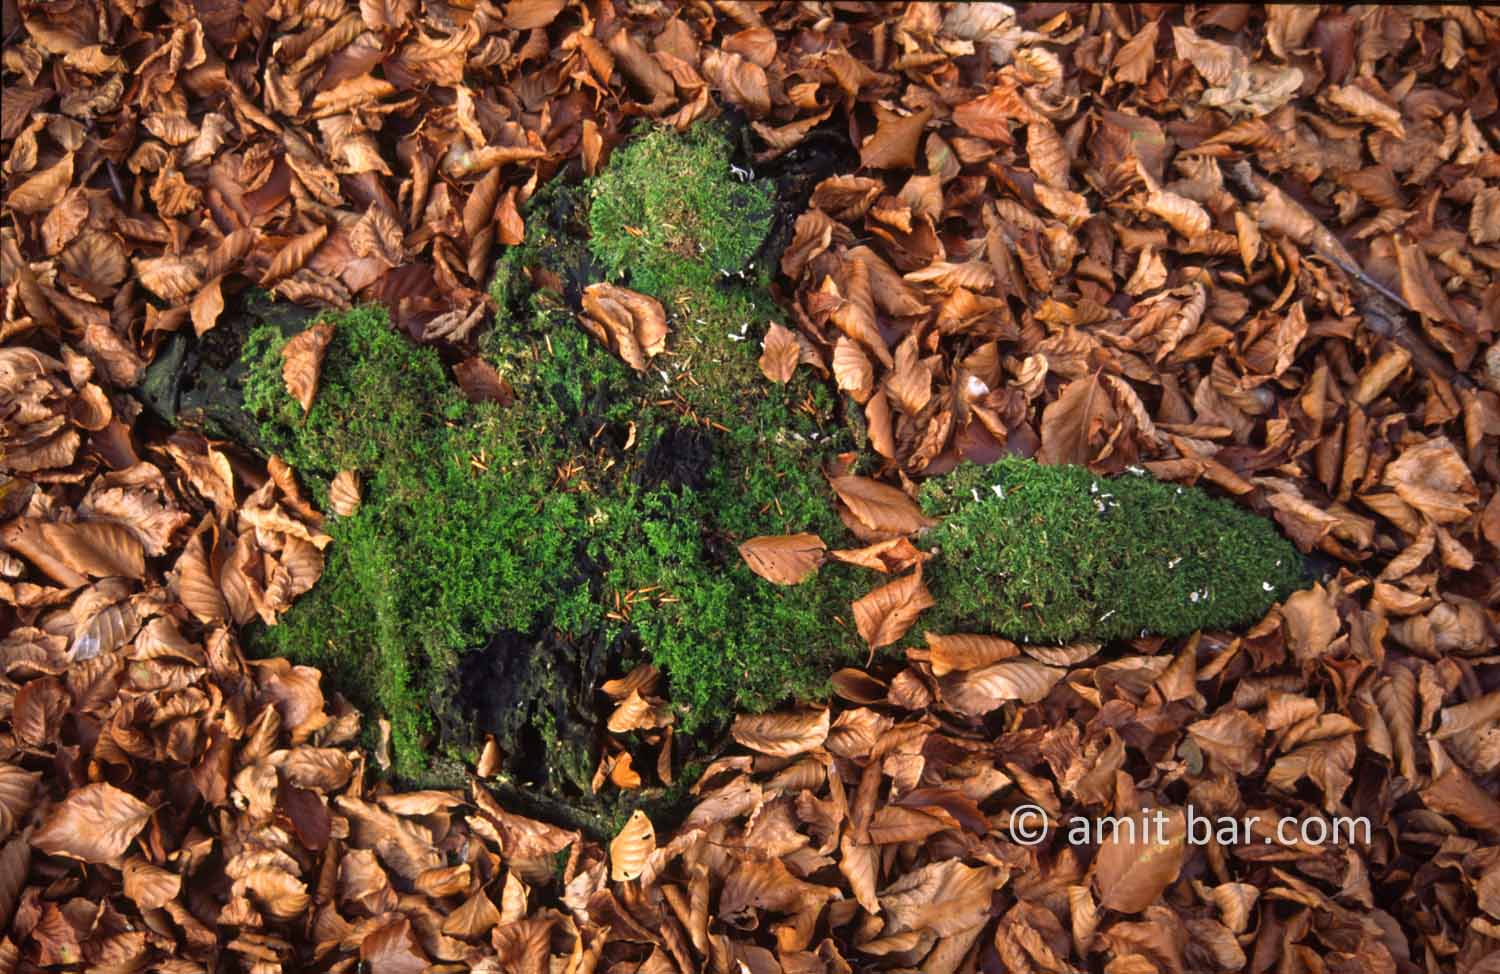 Moss and dry leaves: Moss and dry leaves in the forest